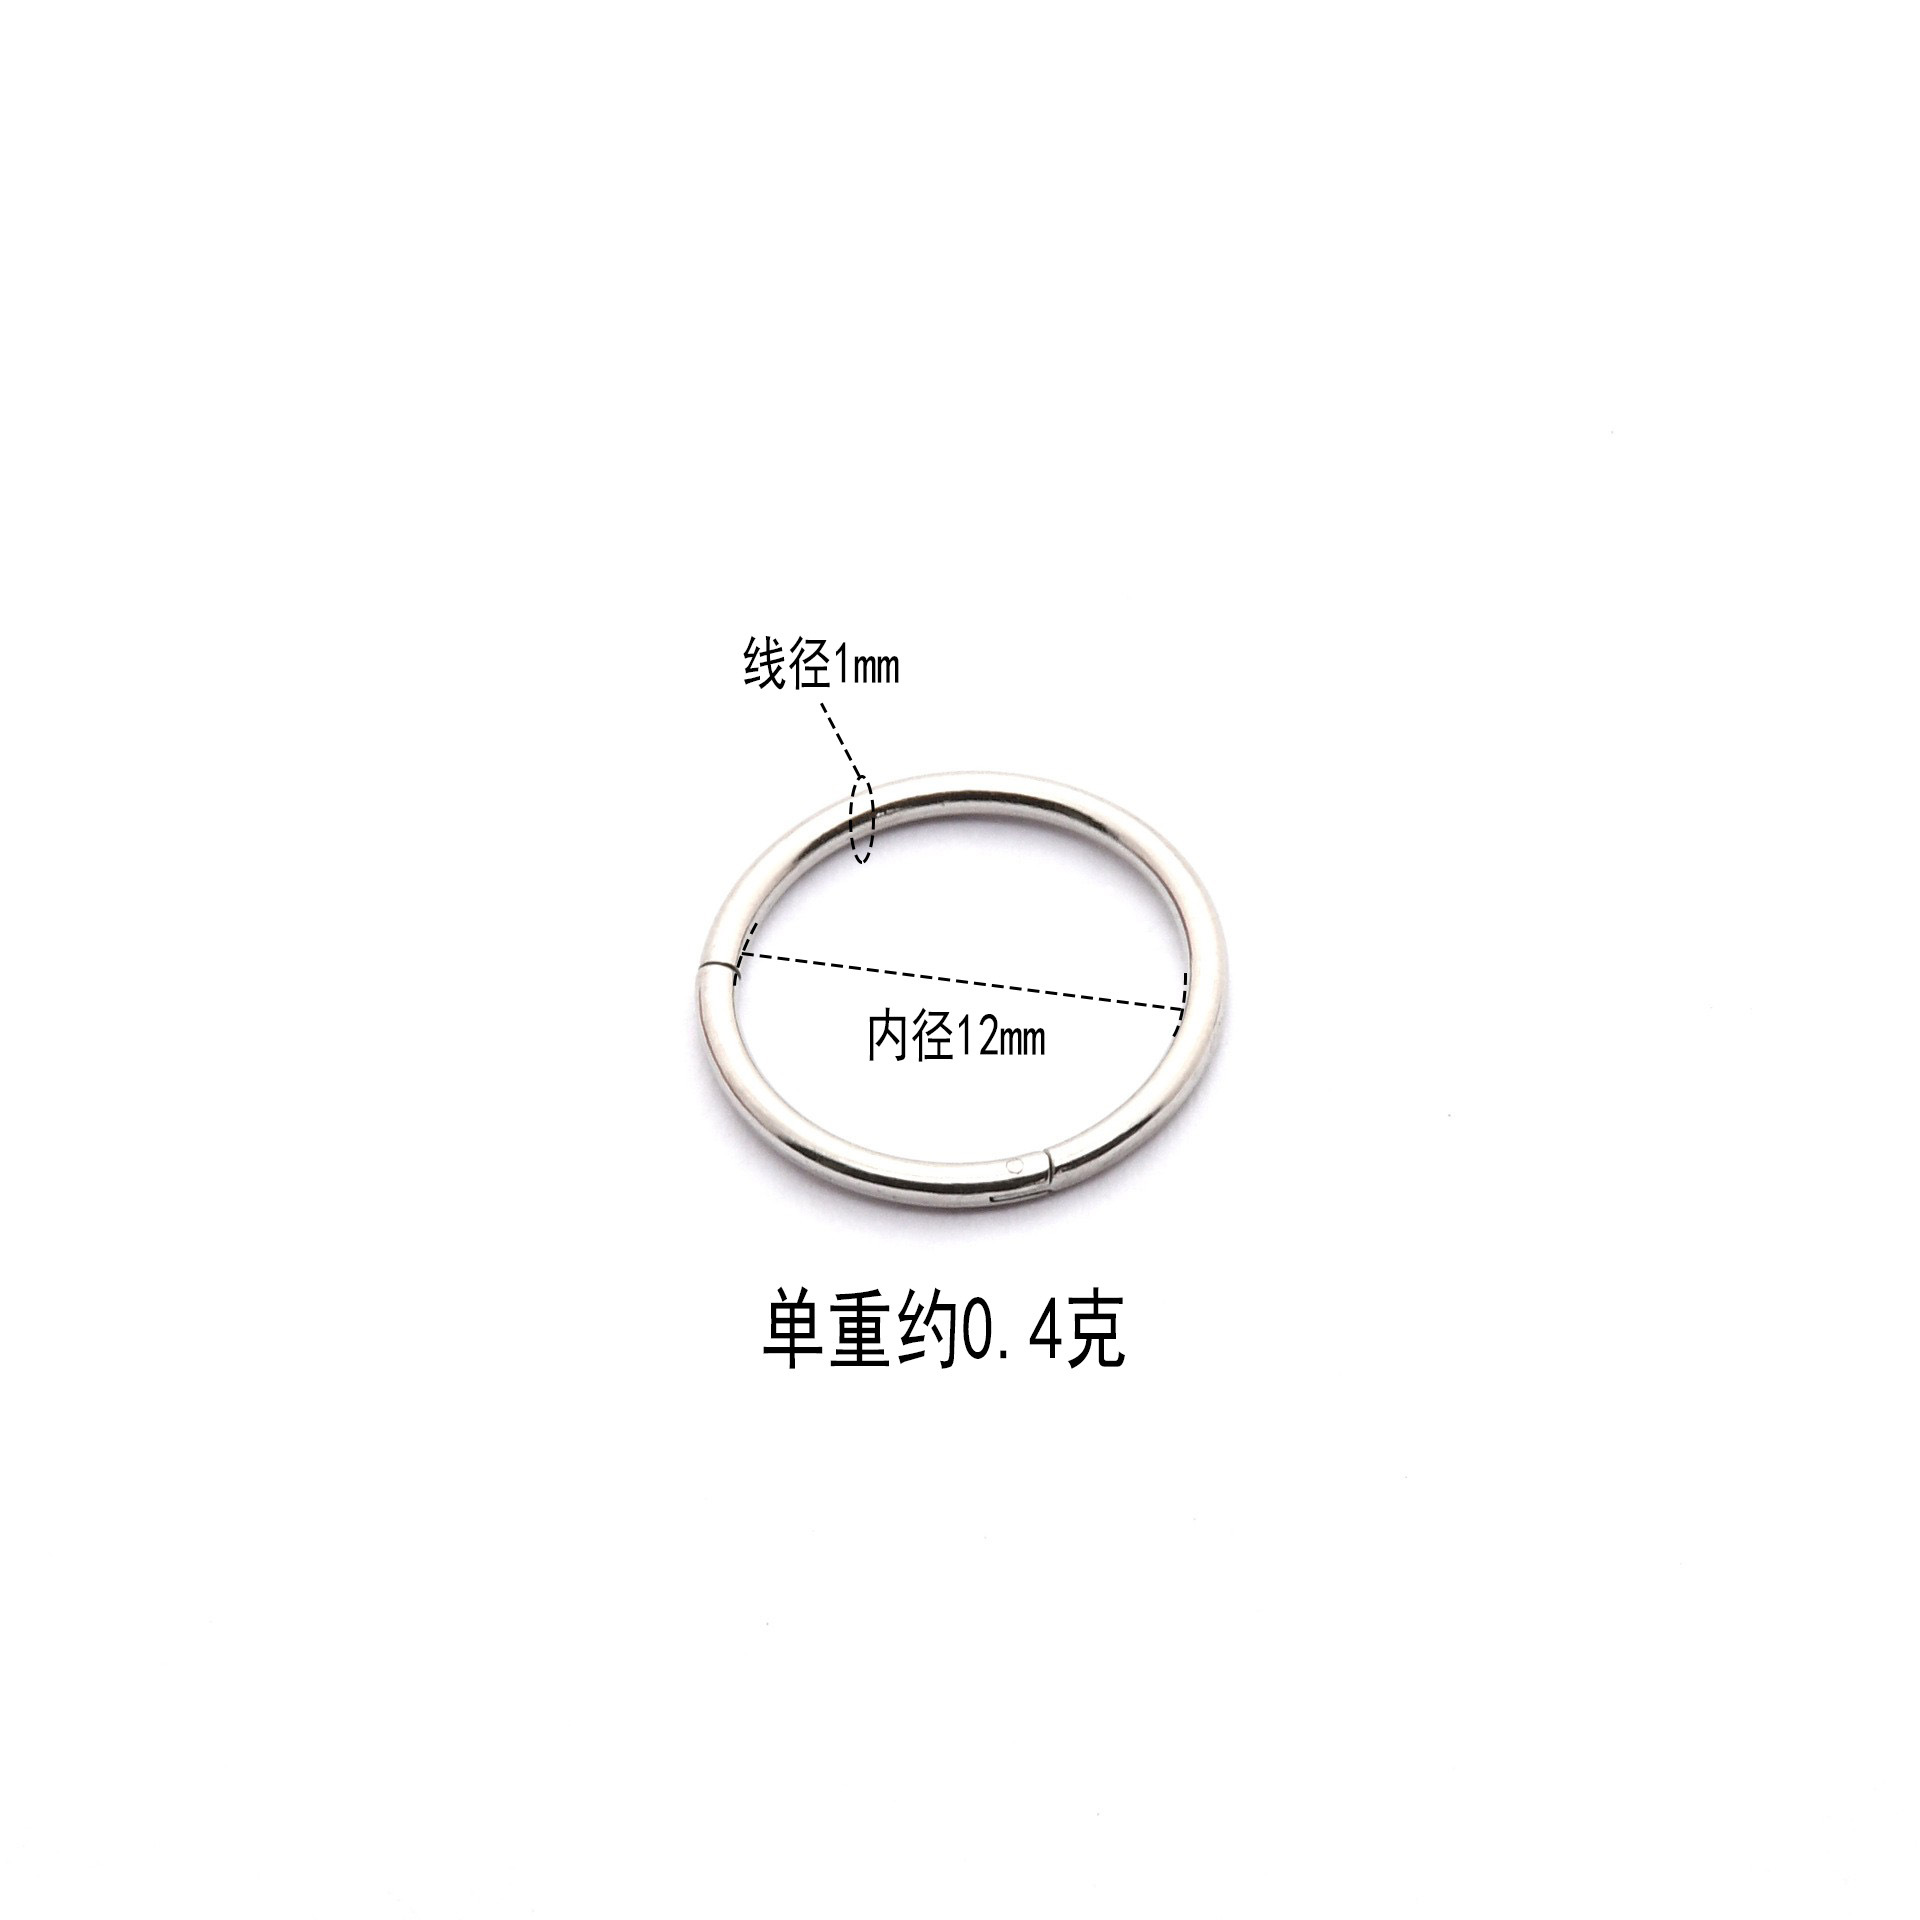 Cross border exclusive jewelry, popular in Europe and America, stainless steel puncture nose ring interface ring, closed ring, seamless nose ring earrings